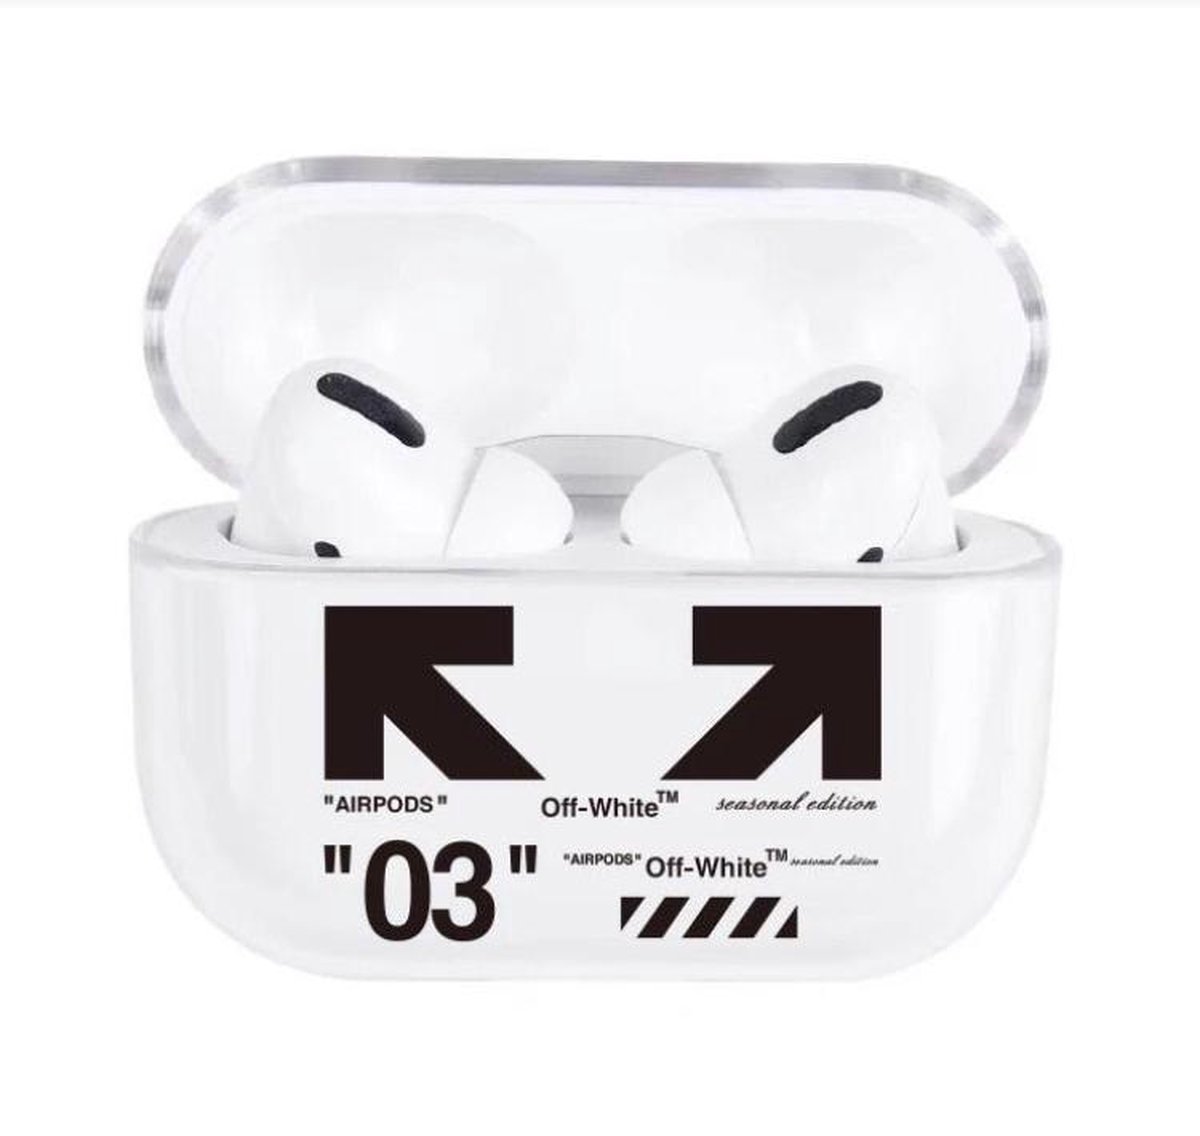 Off-White AirPods Pro - Airpods case hoesje - Case - Cover - Siliconen  Beschermhoes -... | bol